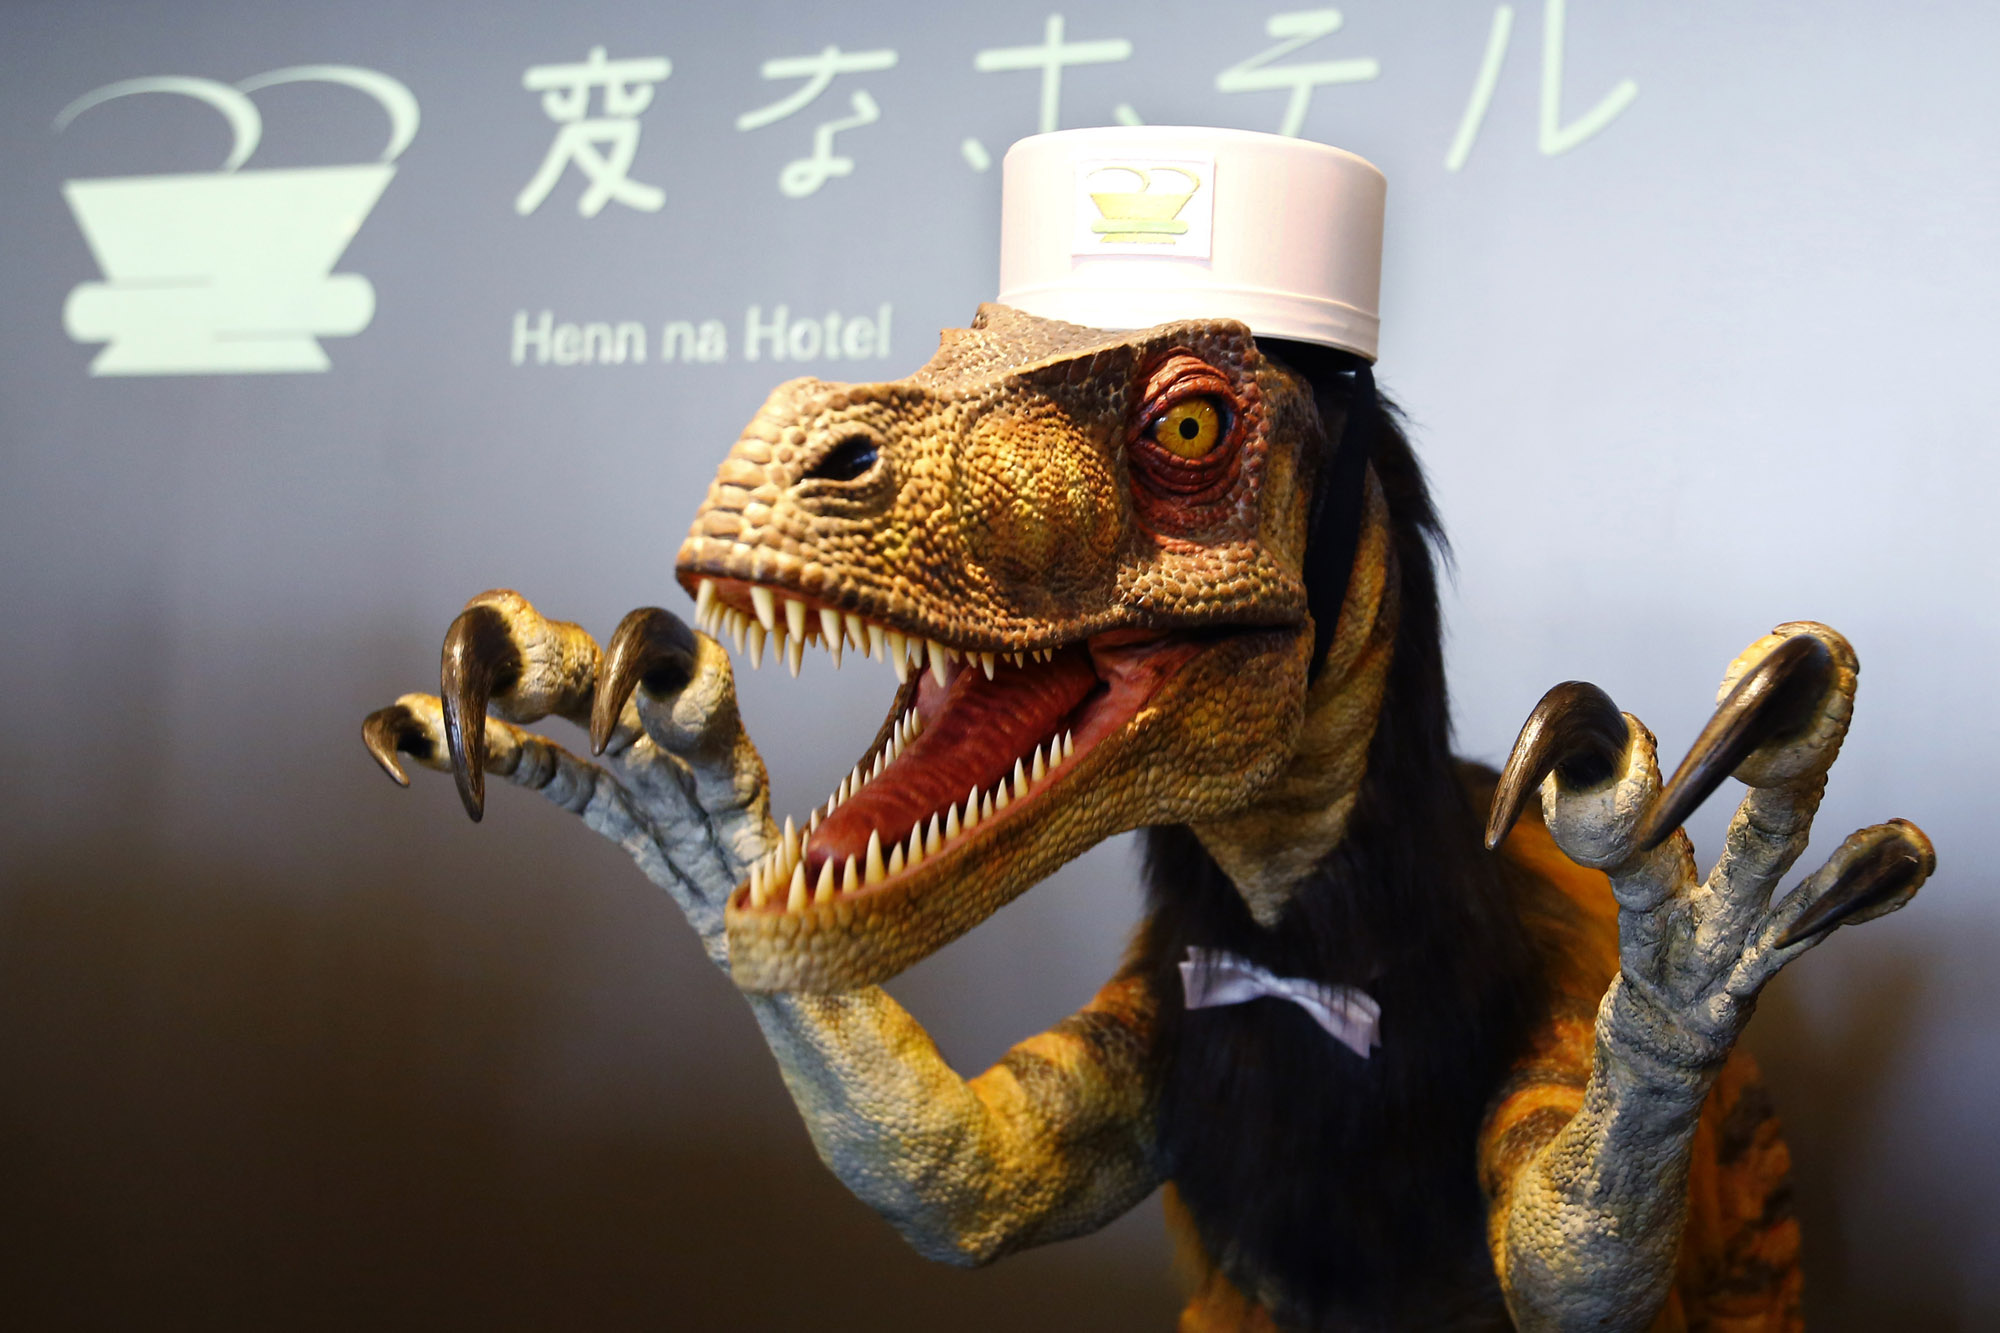 A receptionist dinosaur robot performs at the new robot hotel, aptly called Henn na Hotel or Weird Hotel, in Sasebo, southwestern Japan, Wednesday, July 15, 2015. From the receptionist that does the check-in and check-out to the porter thats a stand-on-wheels taking luggage up to the room, the hotel, that is run as part of Huis Ten Bosch amusement park, is manned almost totally by robots to save labor costs. (AP Photo/Shizuo Kambayashi)